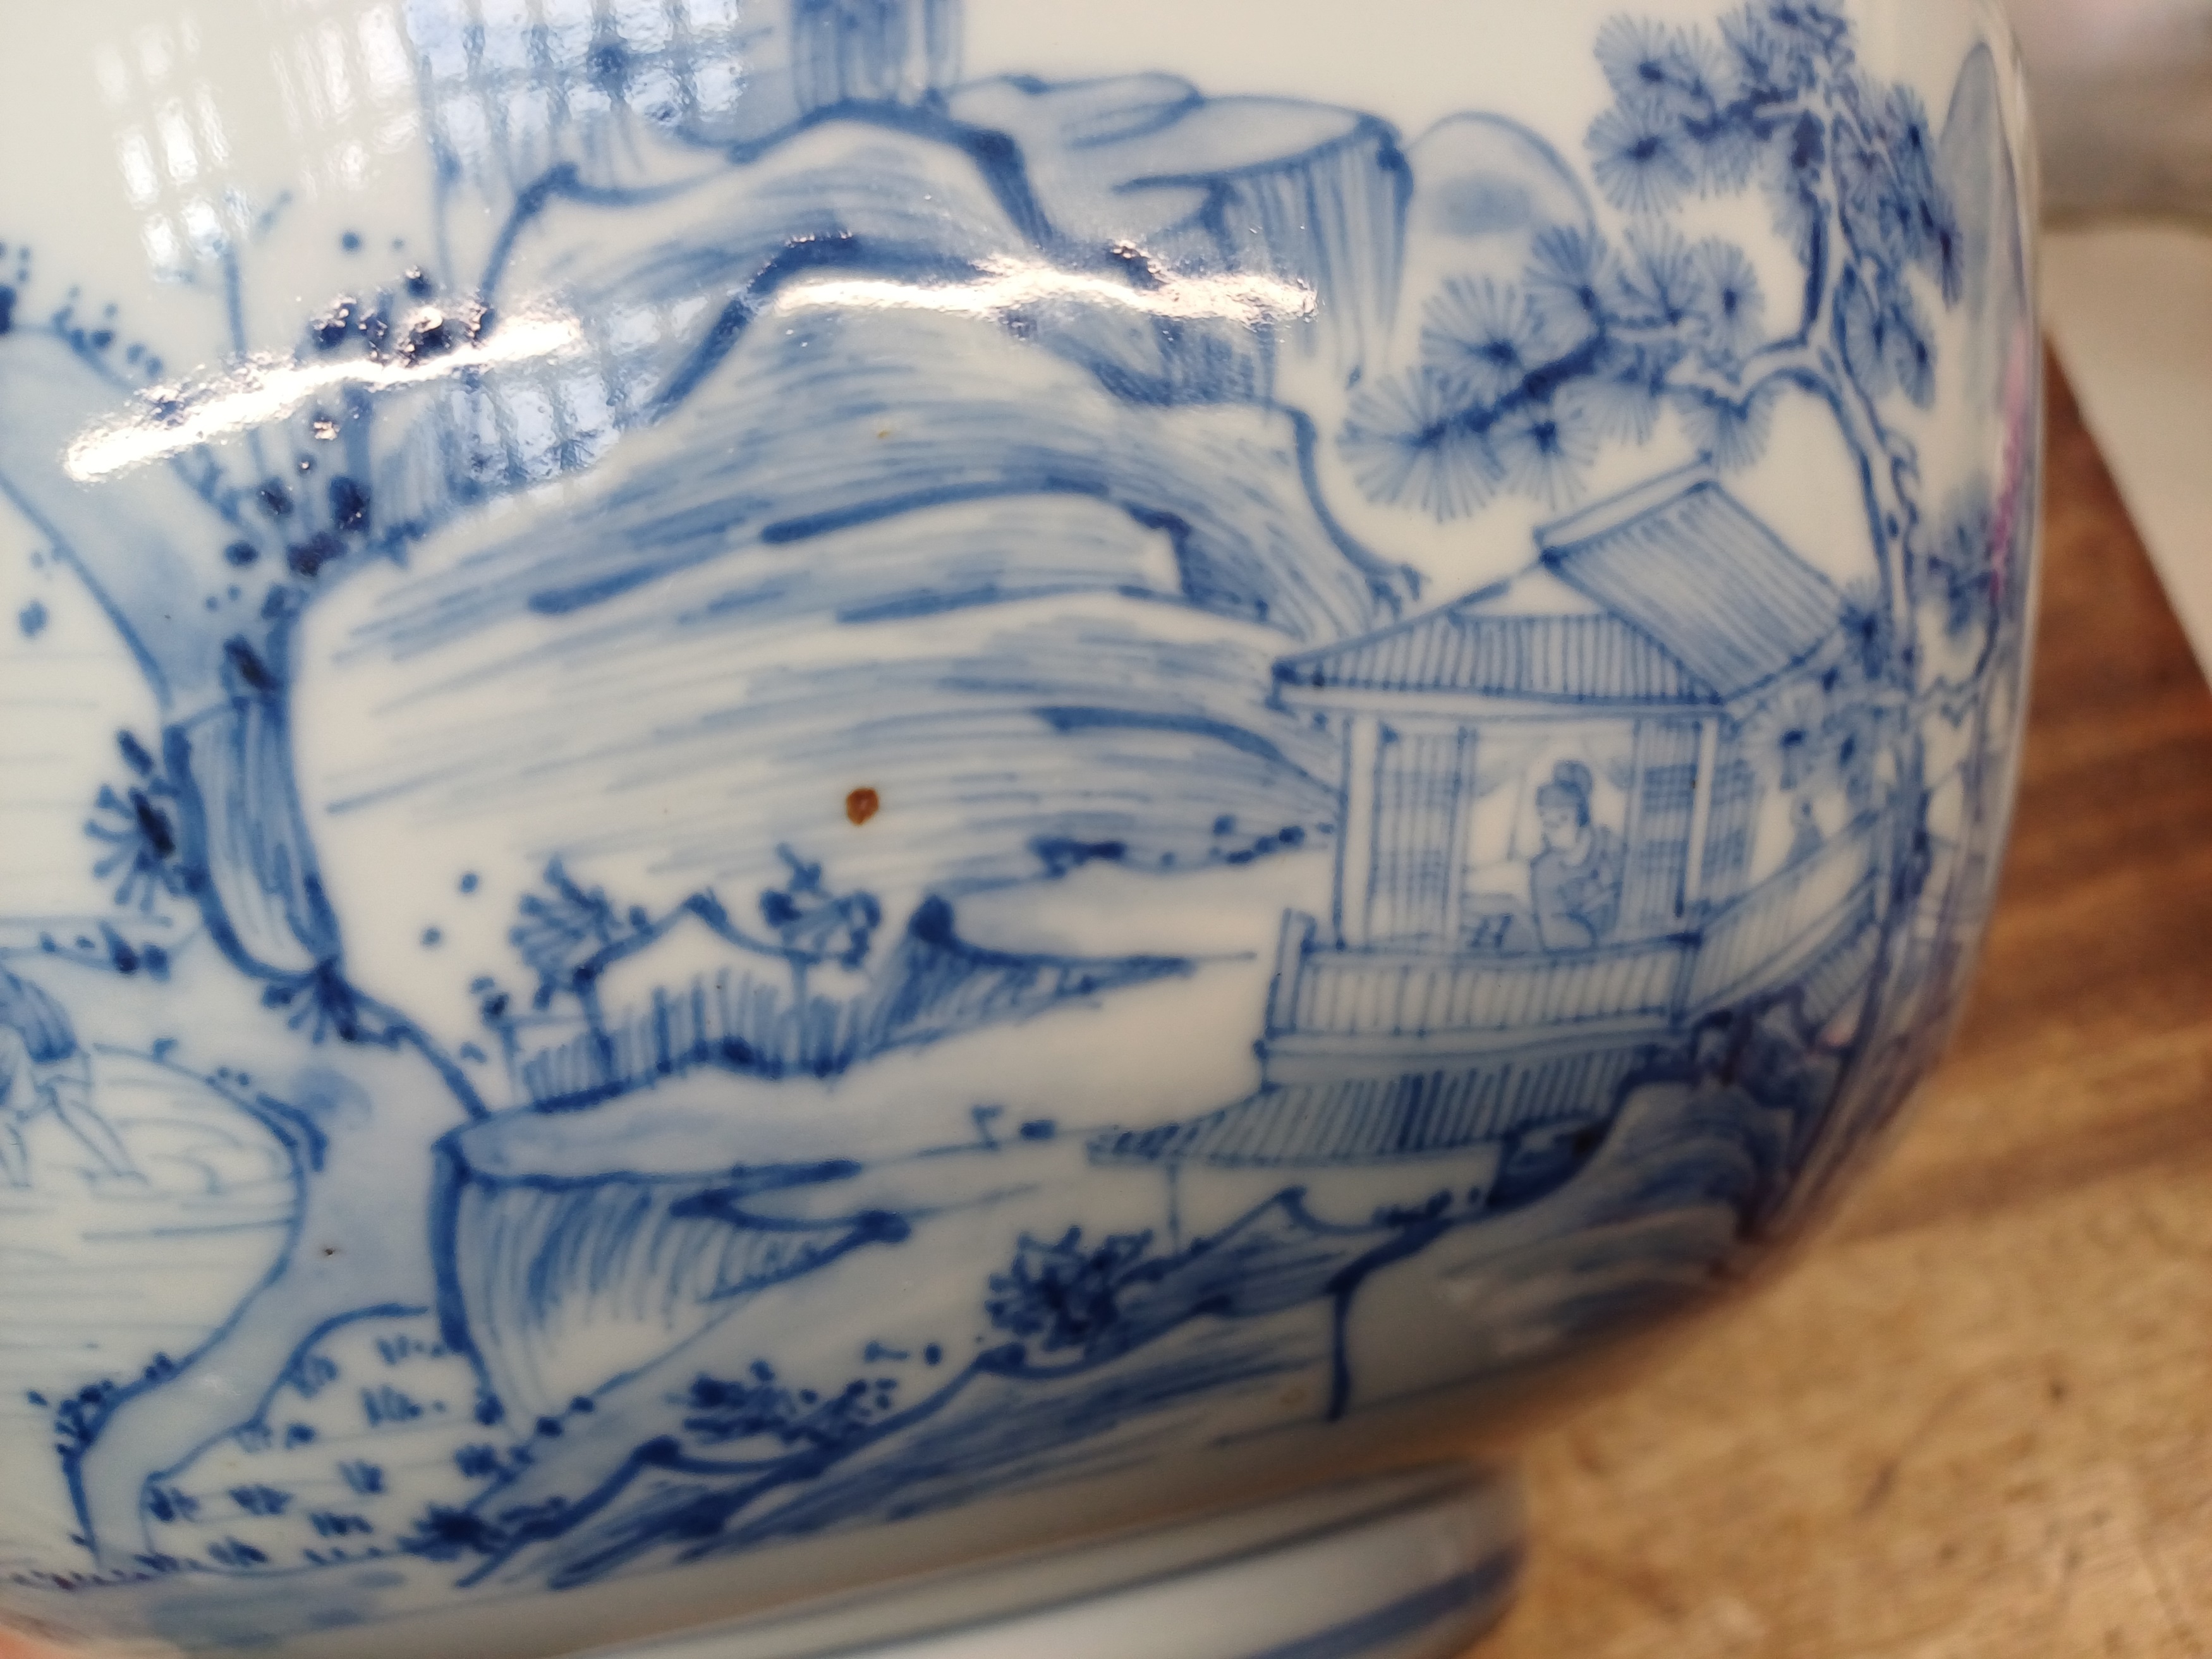 A RARE CHINESE BLUE AND WHITE 'MASTER OF THE ROCKS' BOWL 清康熙或雍正 青花山水人物圖紋盌 - Image 9 of 19